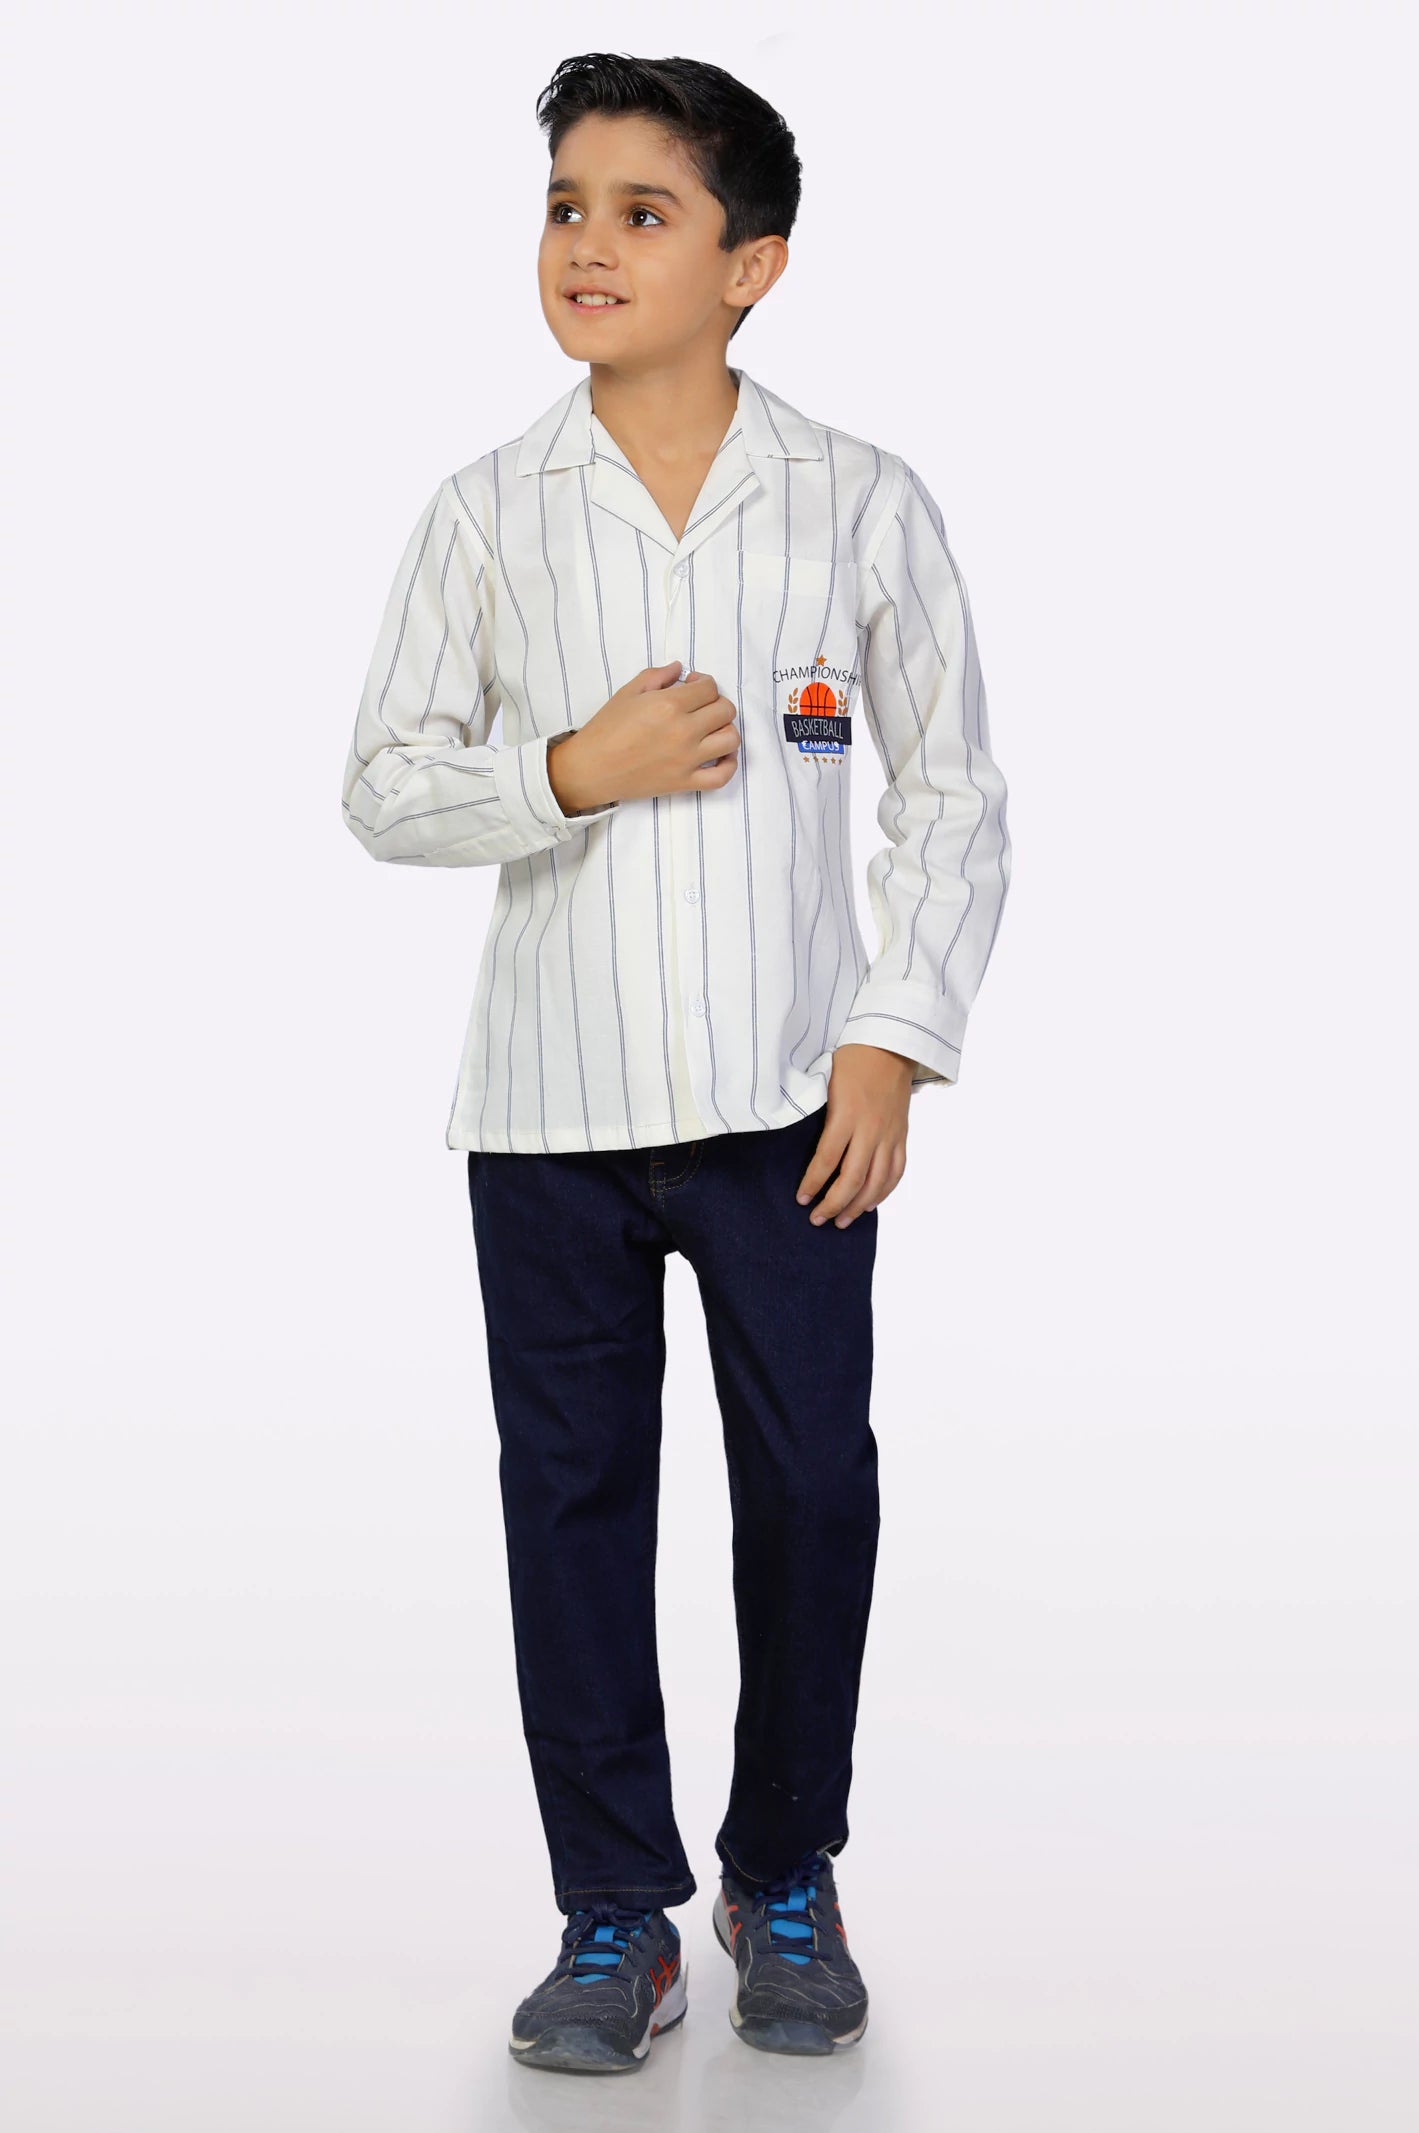 White Stripe Boys Shirt From Diners